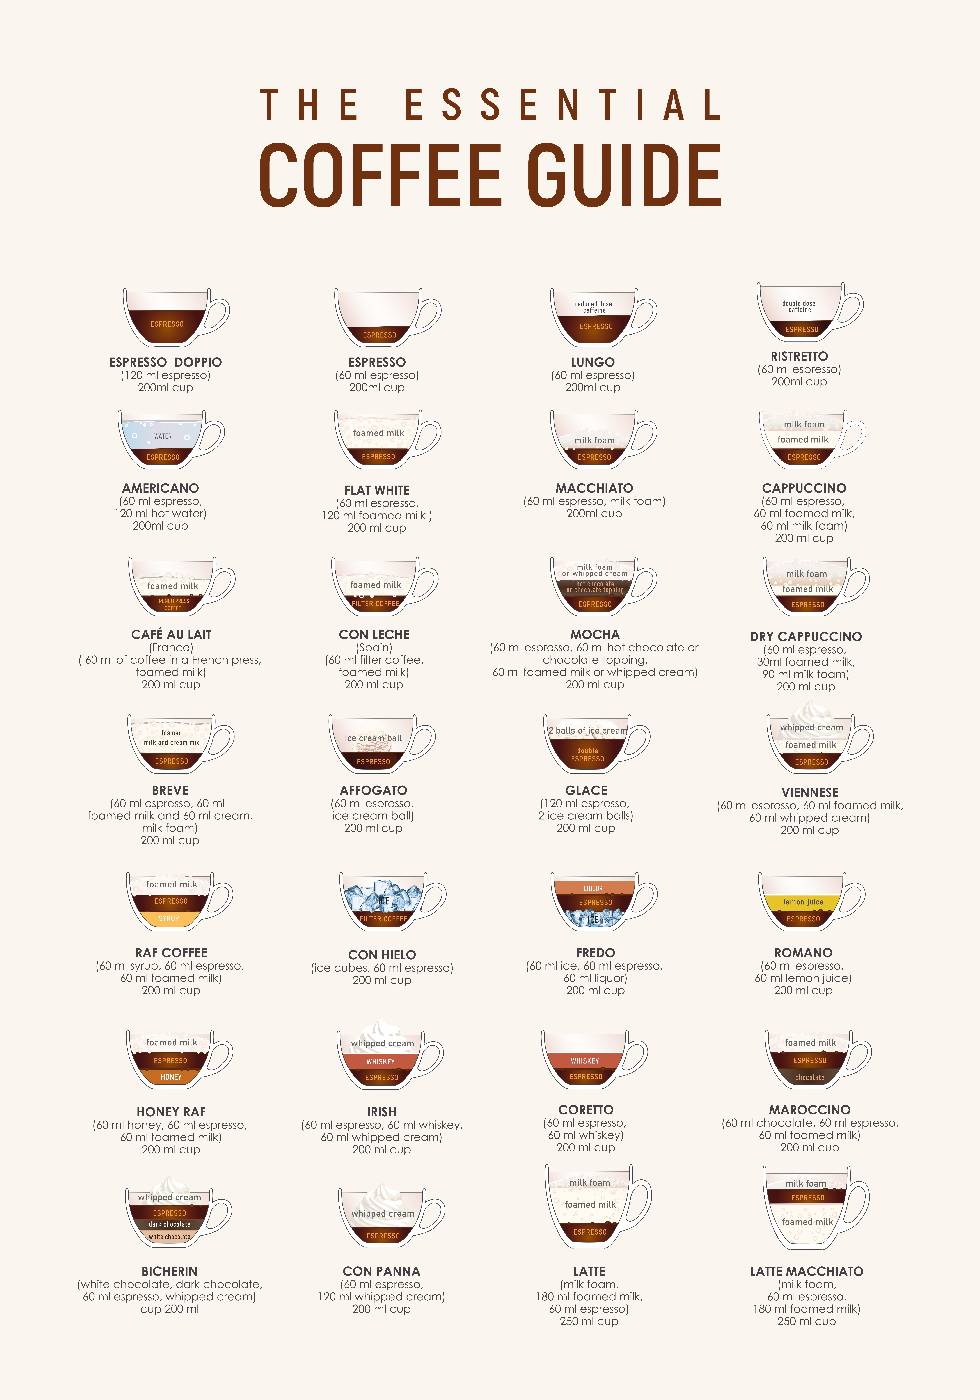 Coffee Guide Poster